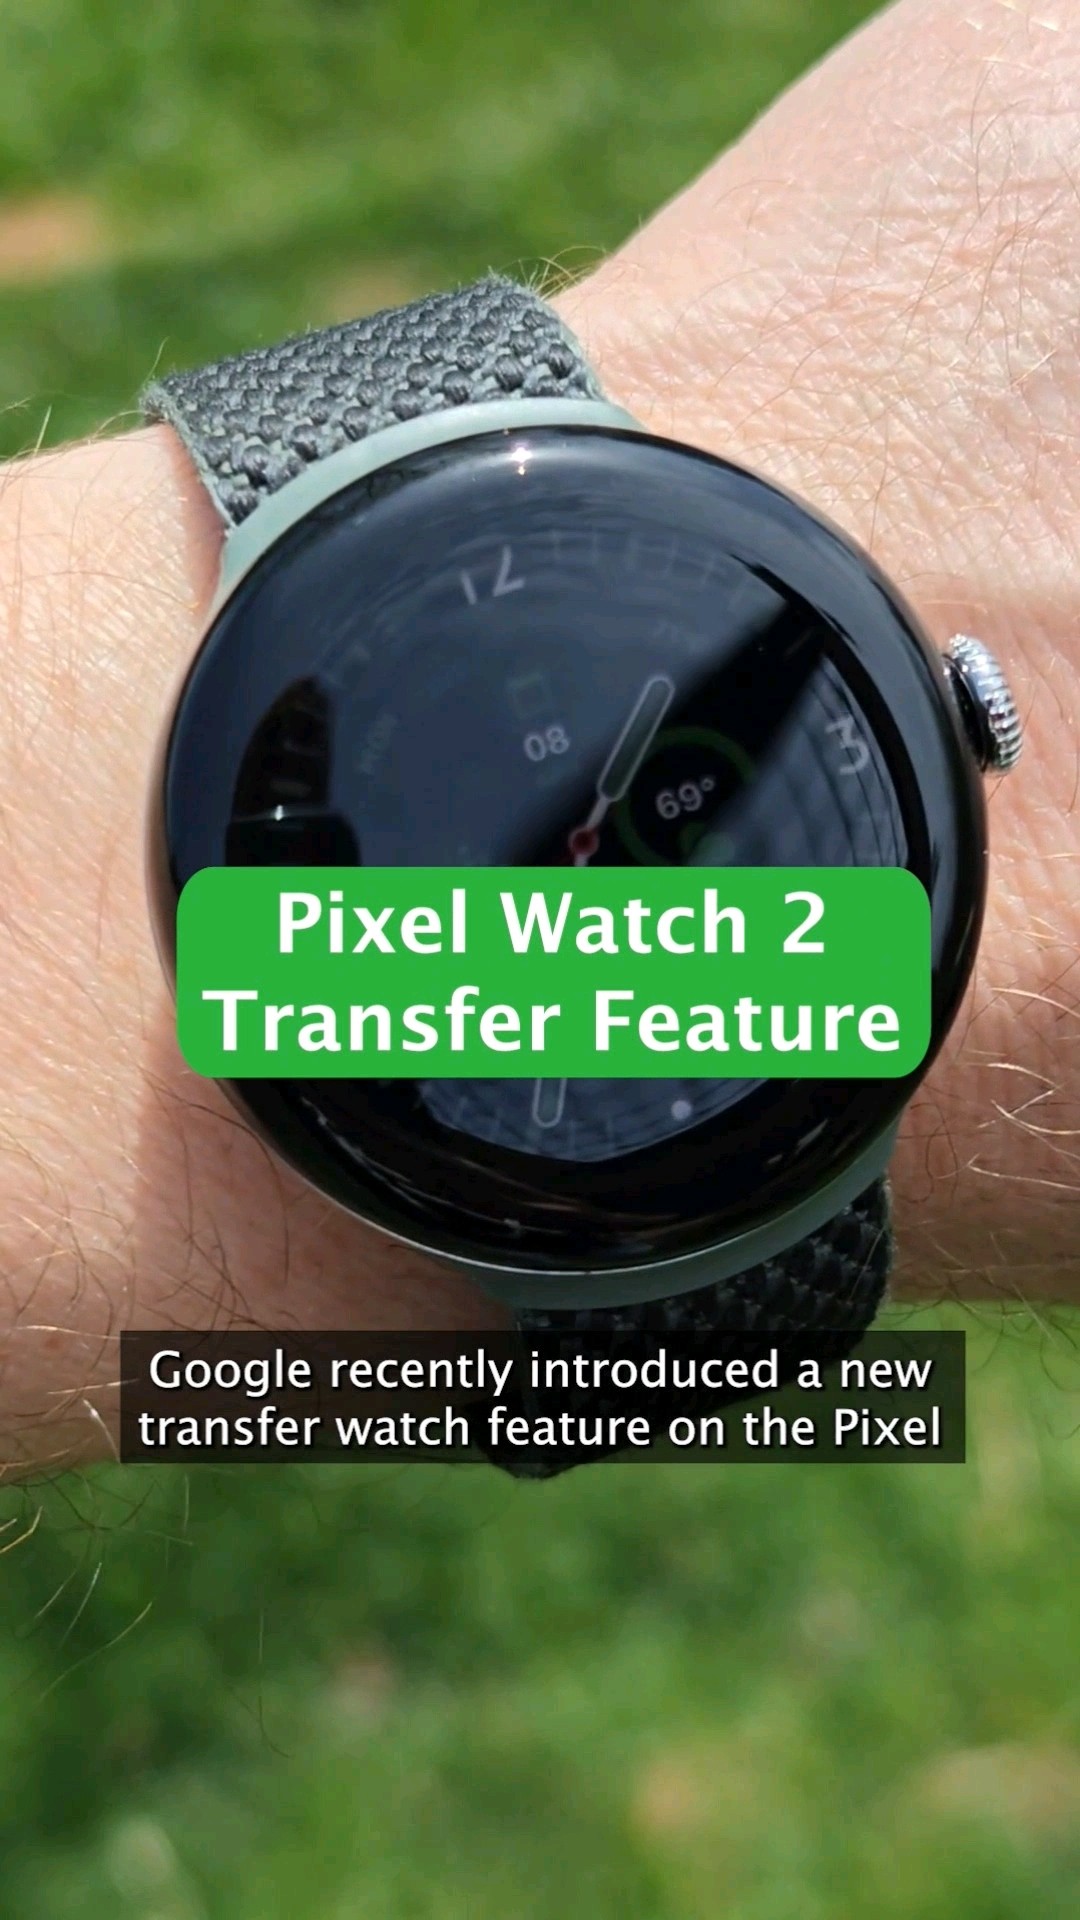 Want to transfer your Pixel Watch to a new phone without a factory reset? Now it's super easy!